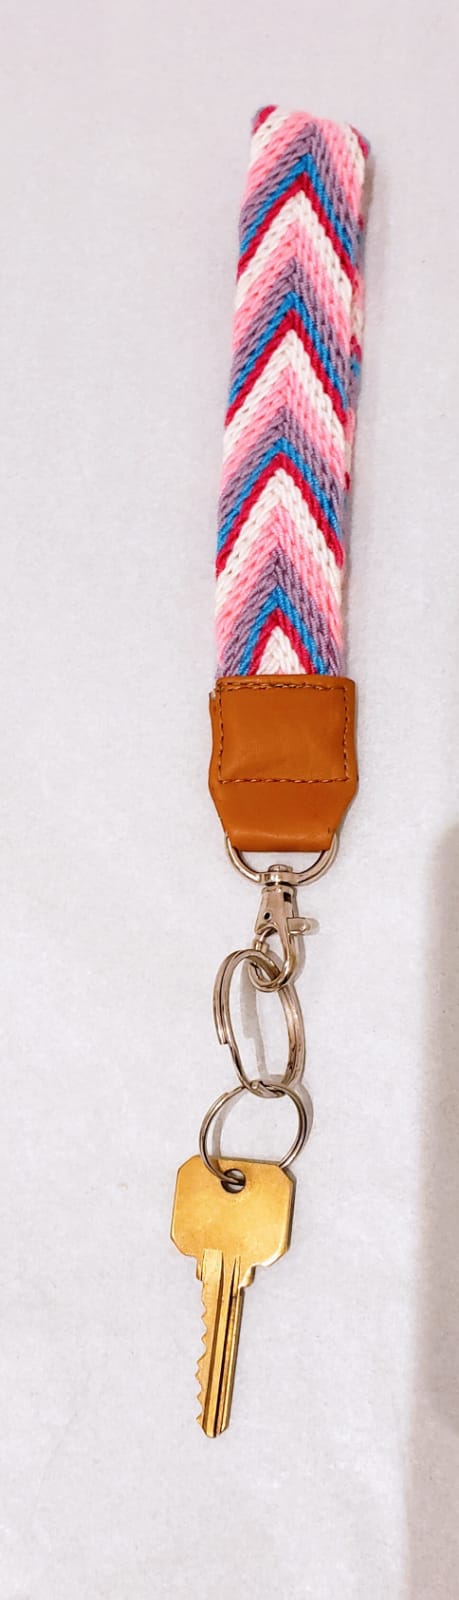 Key Chains (4 different colors)